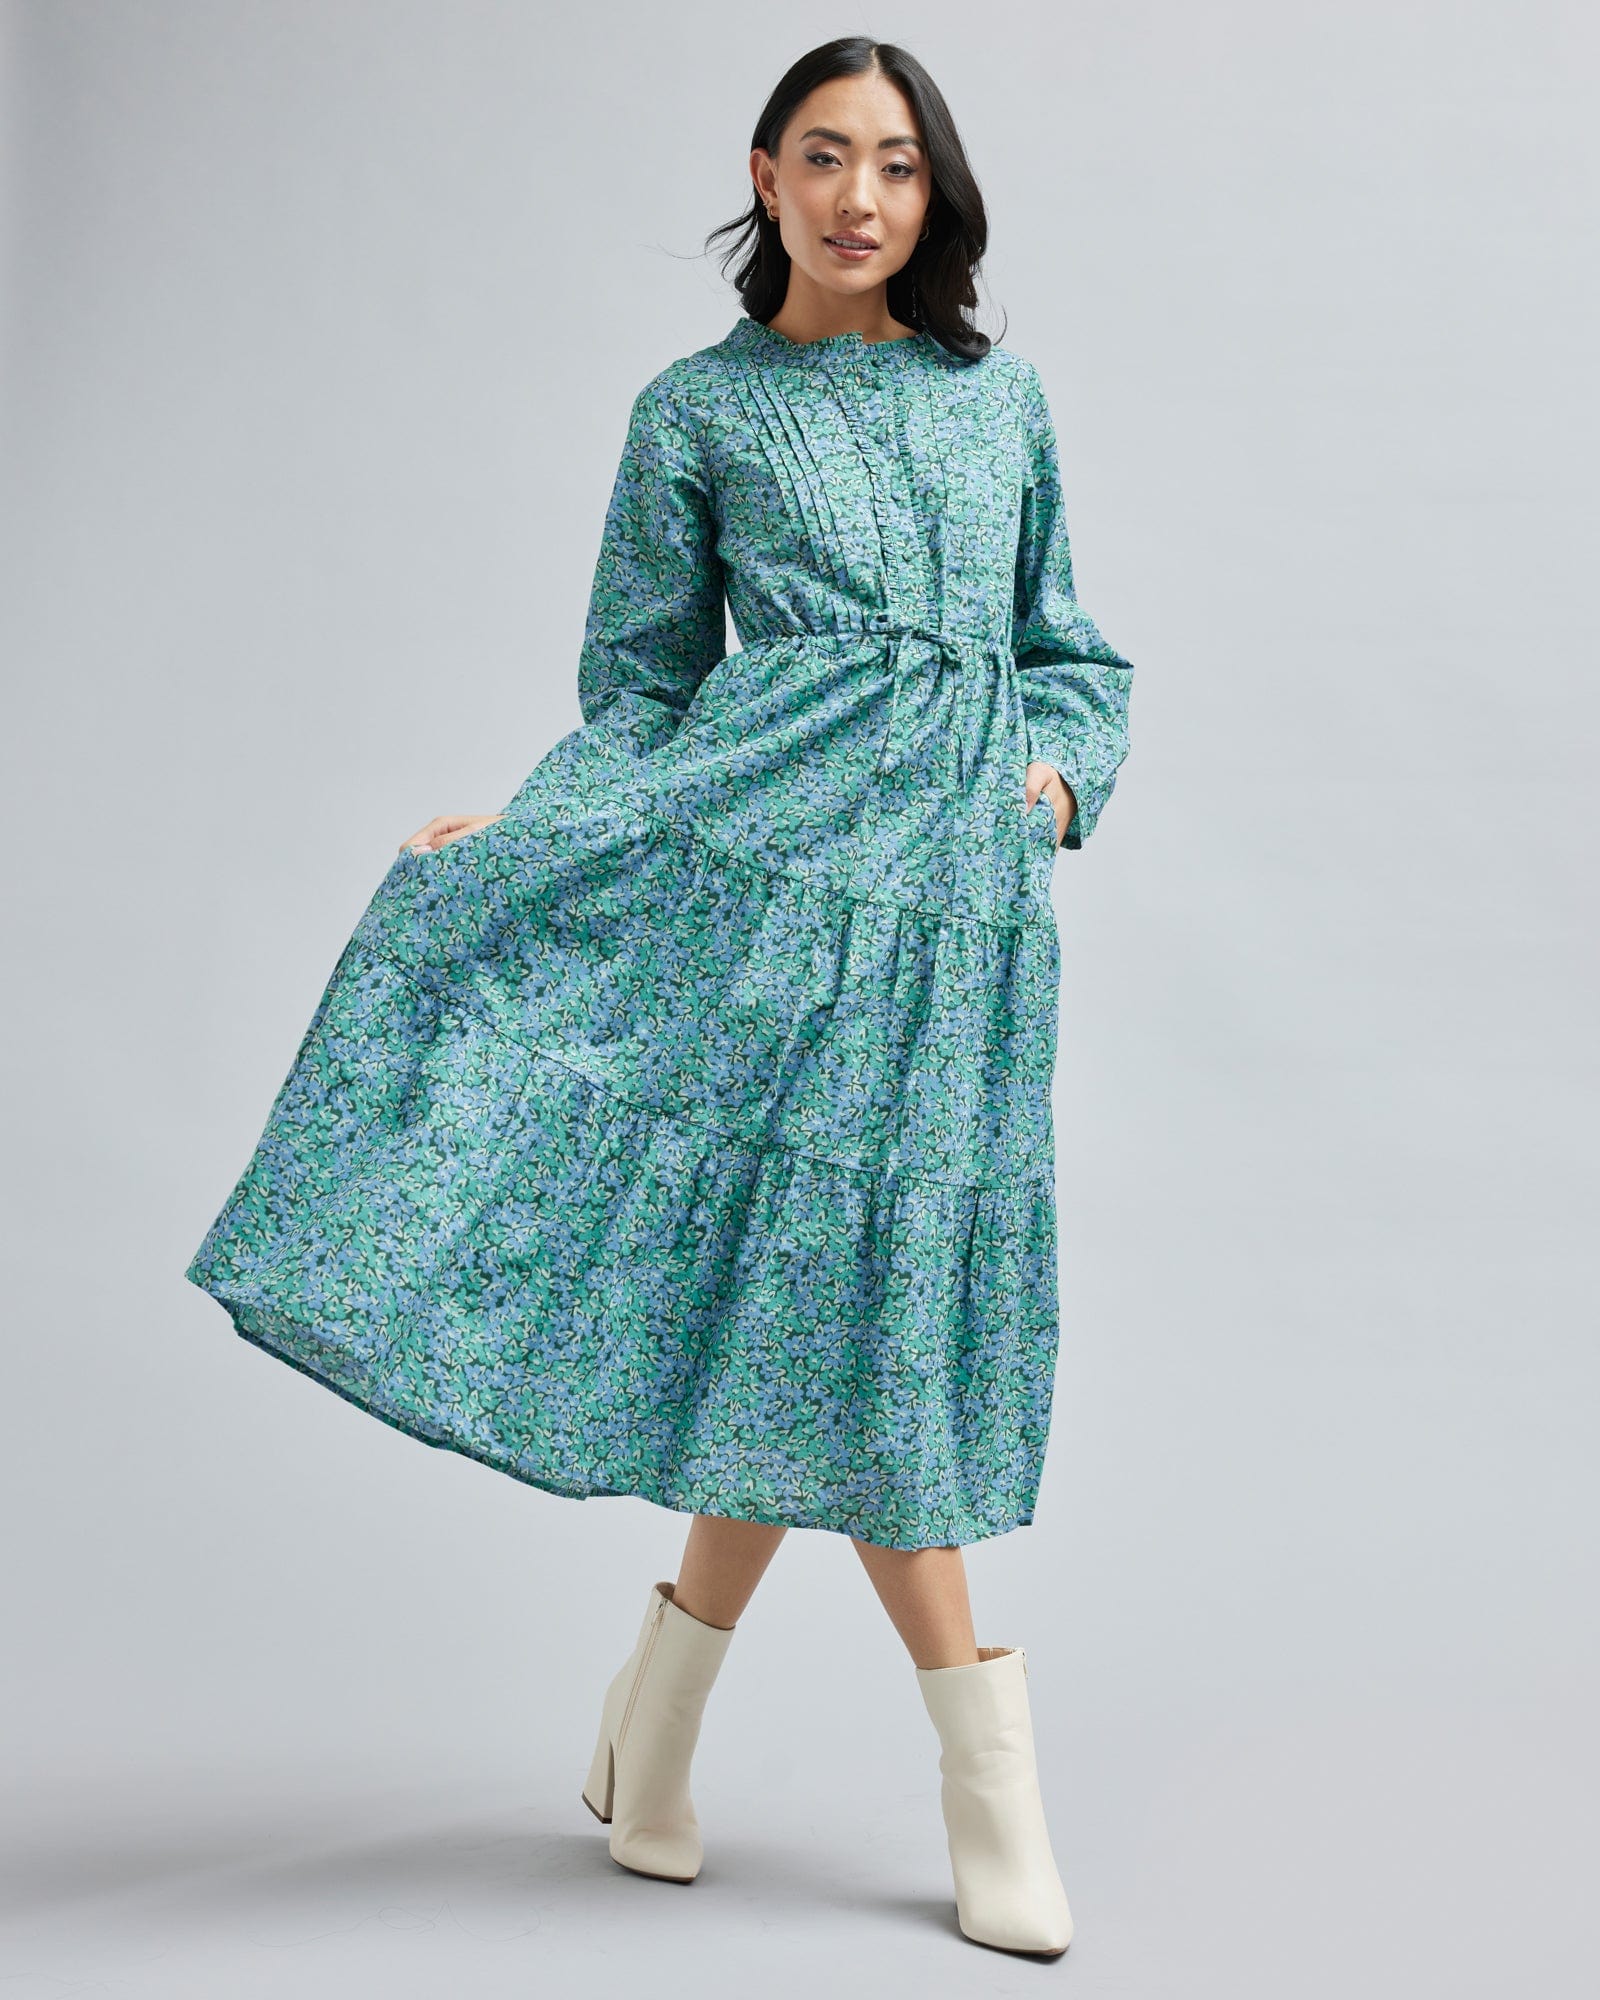 Woman in a long sleeve, teal dress